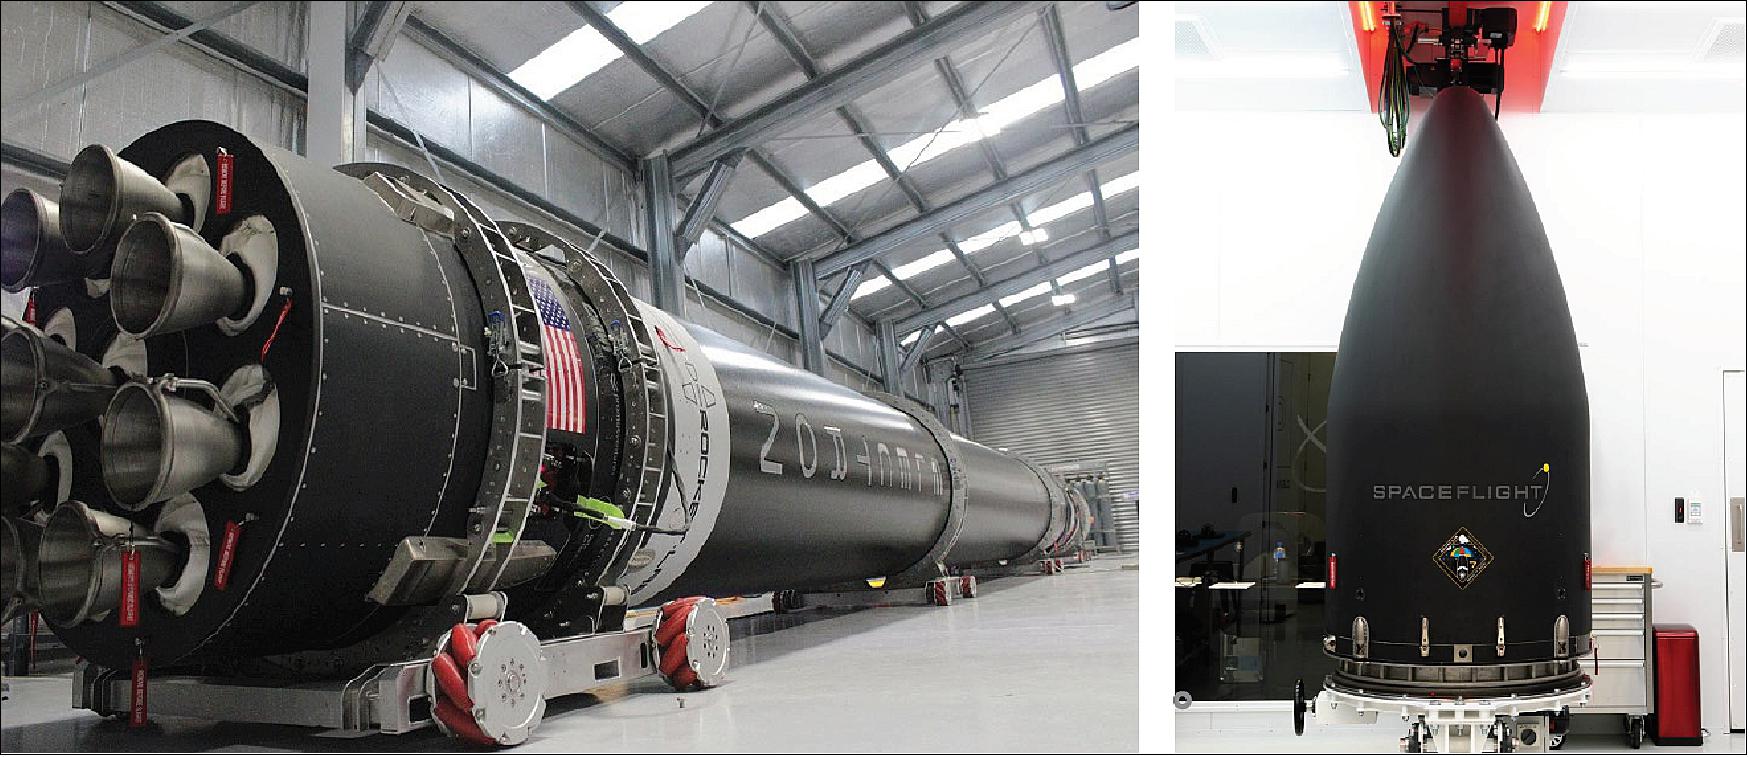 Figure 55: Left: Electron arrives at LC-1 in preparation for the Make it Rain mission. Right: Make it Rain Fairing (image credit: Rocket Lab, June 2019)